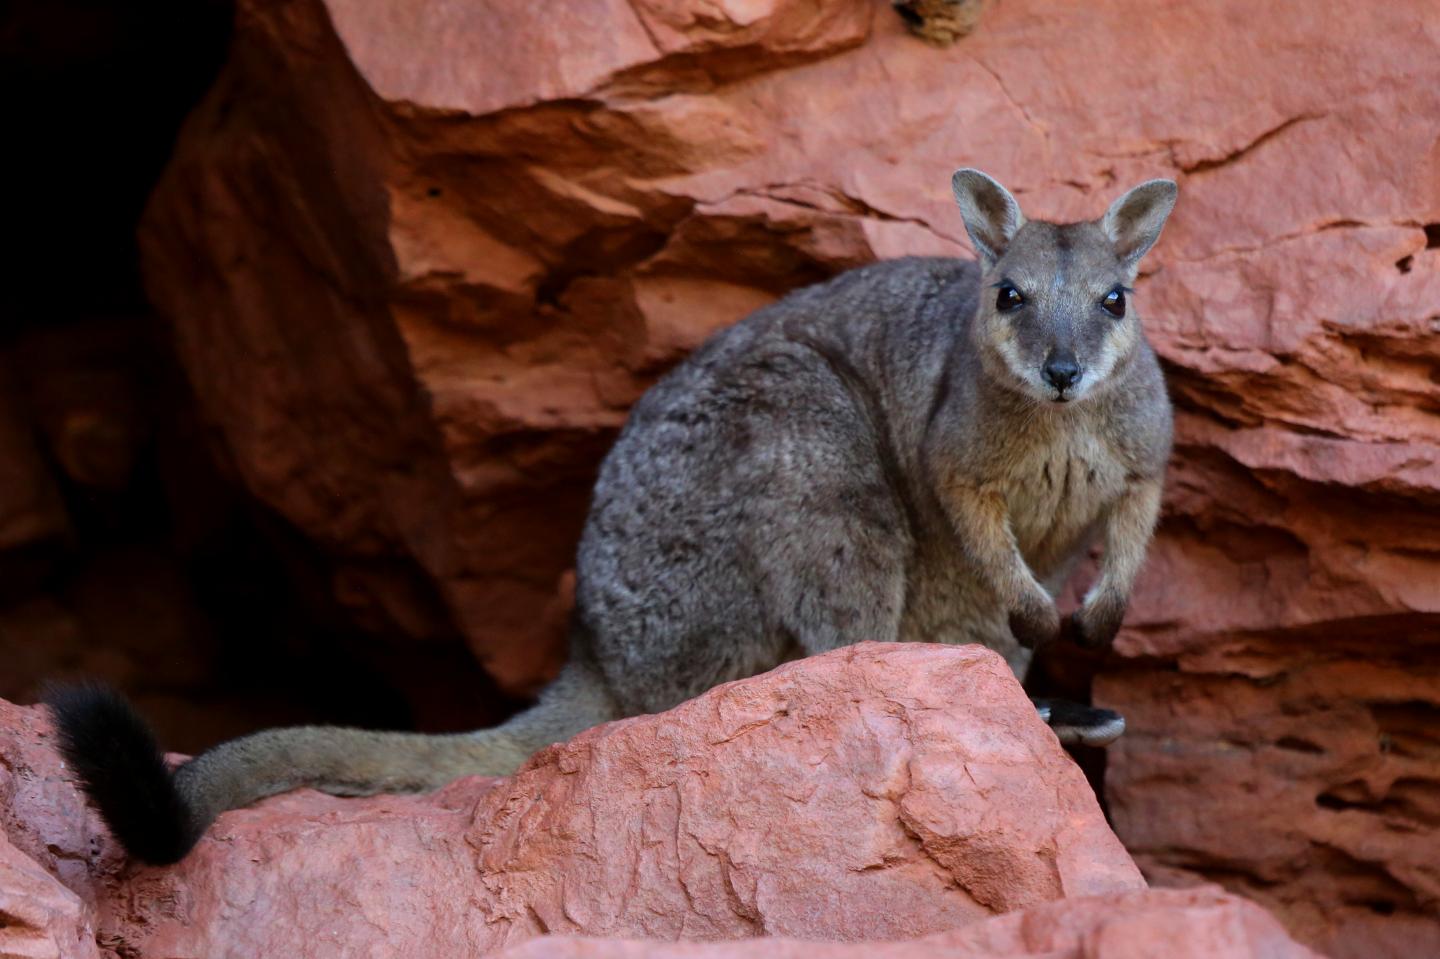 The Short-Eared Rock Wallaby